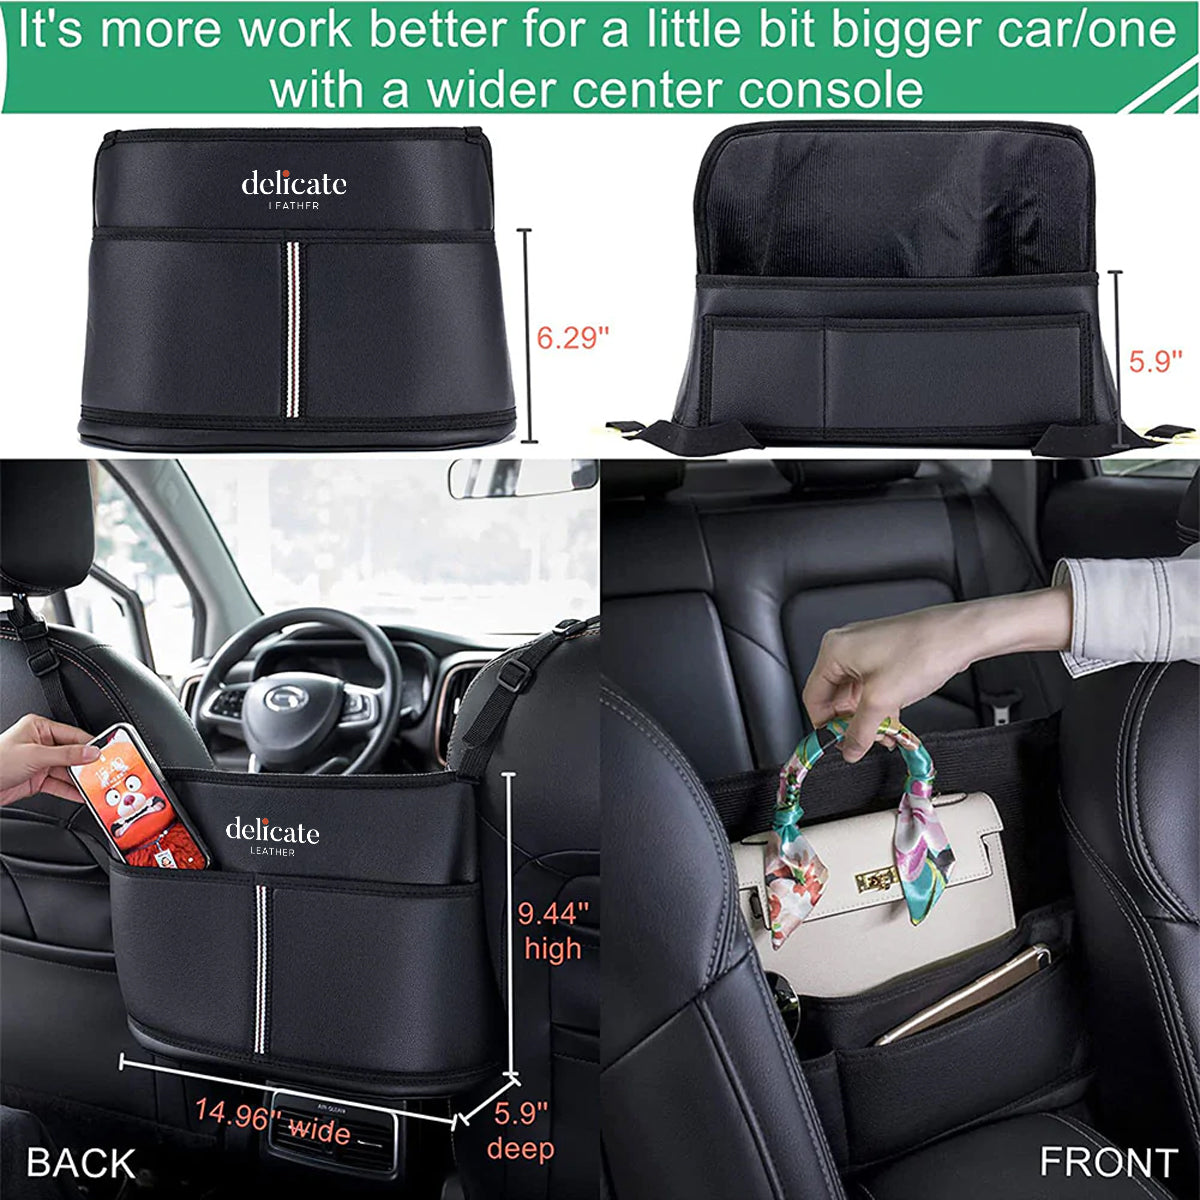 Keep Your Bag Accessible with our Delicate Leather Car Purse Holder